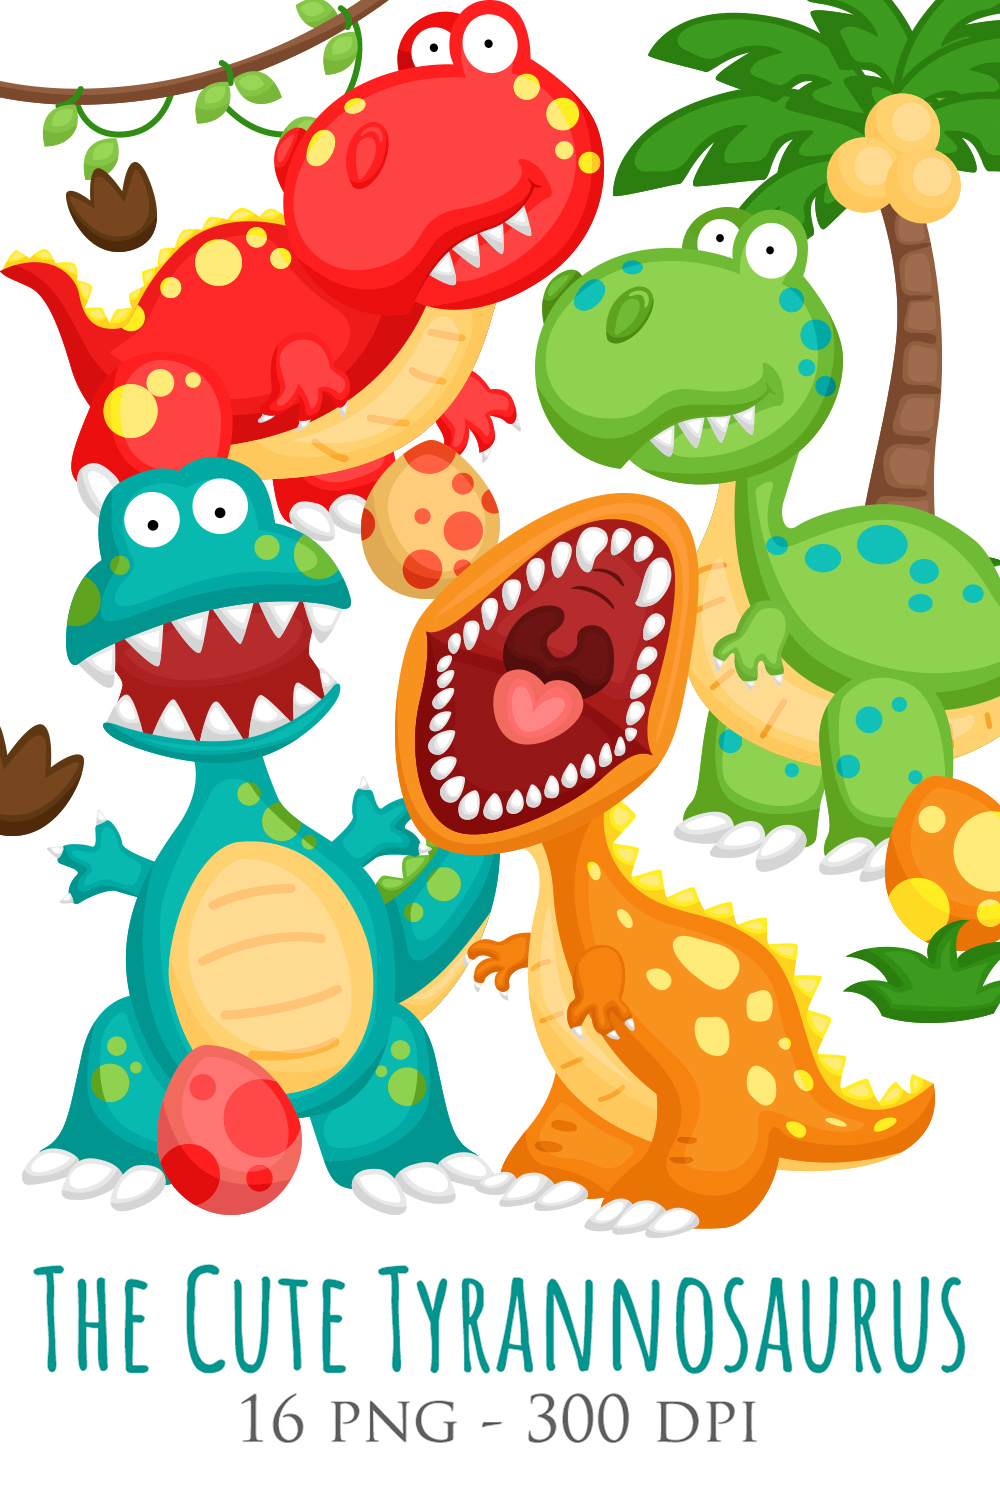 Colorful Cute and Funny Animal Dinosaur Tryannosaurus Trex Ancient Cartoon Illustration Vector Clipart Sticker Background Decoration pinterest preview image.